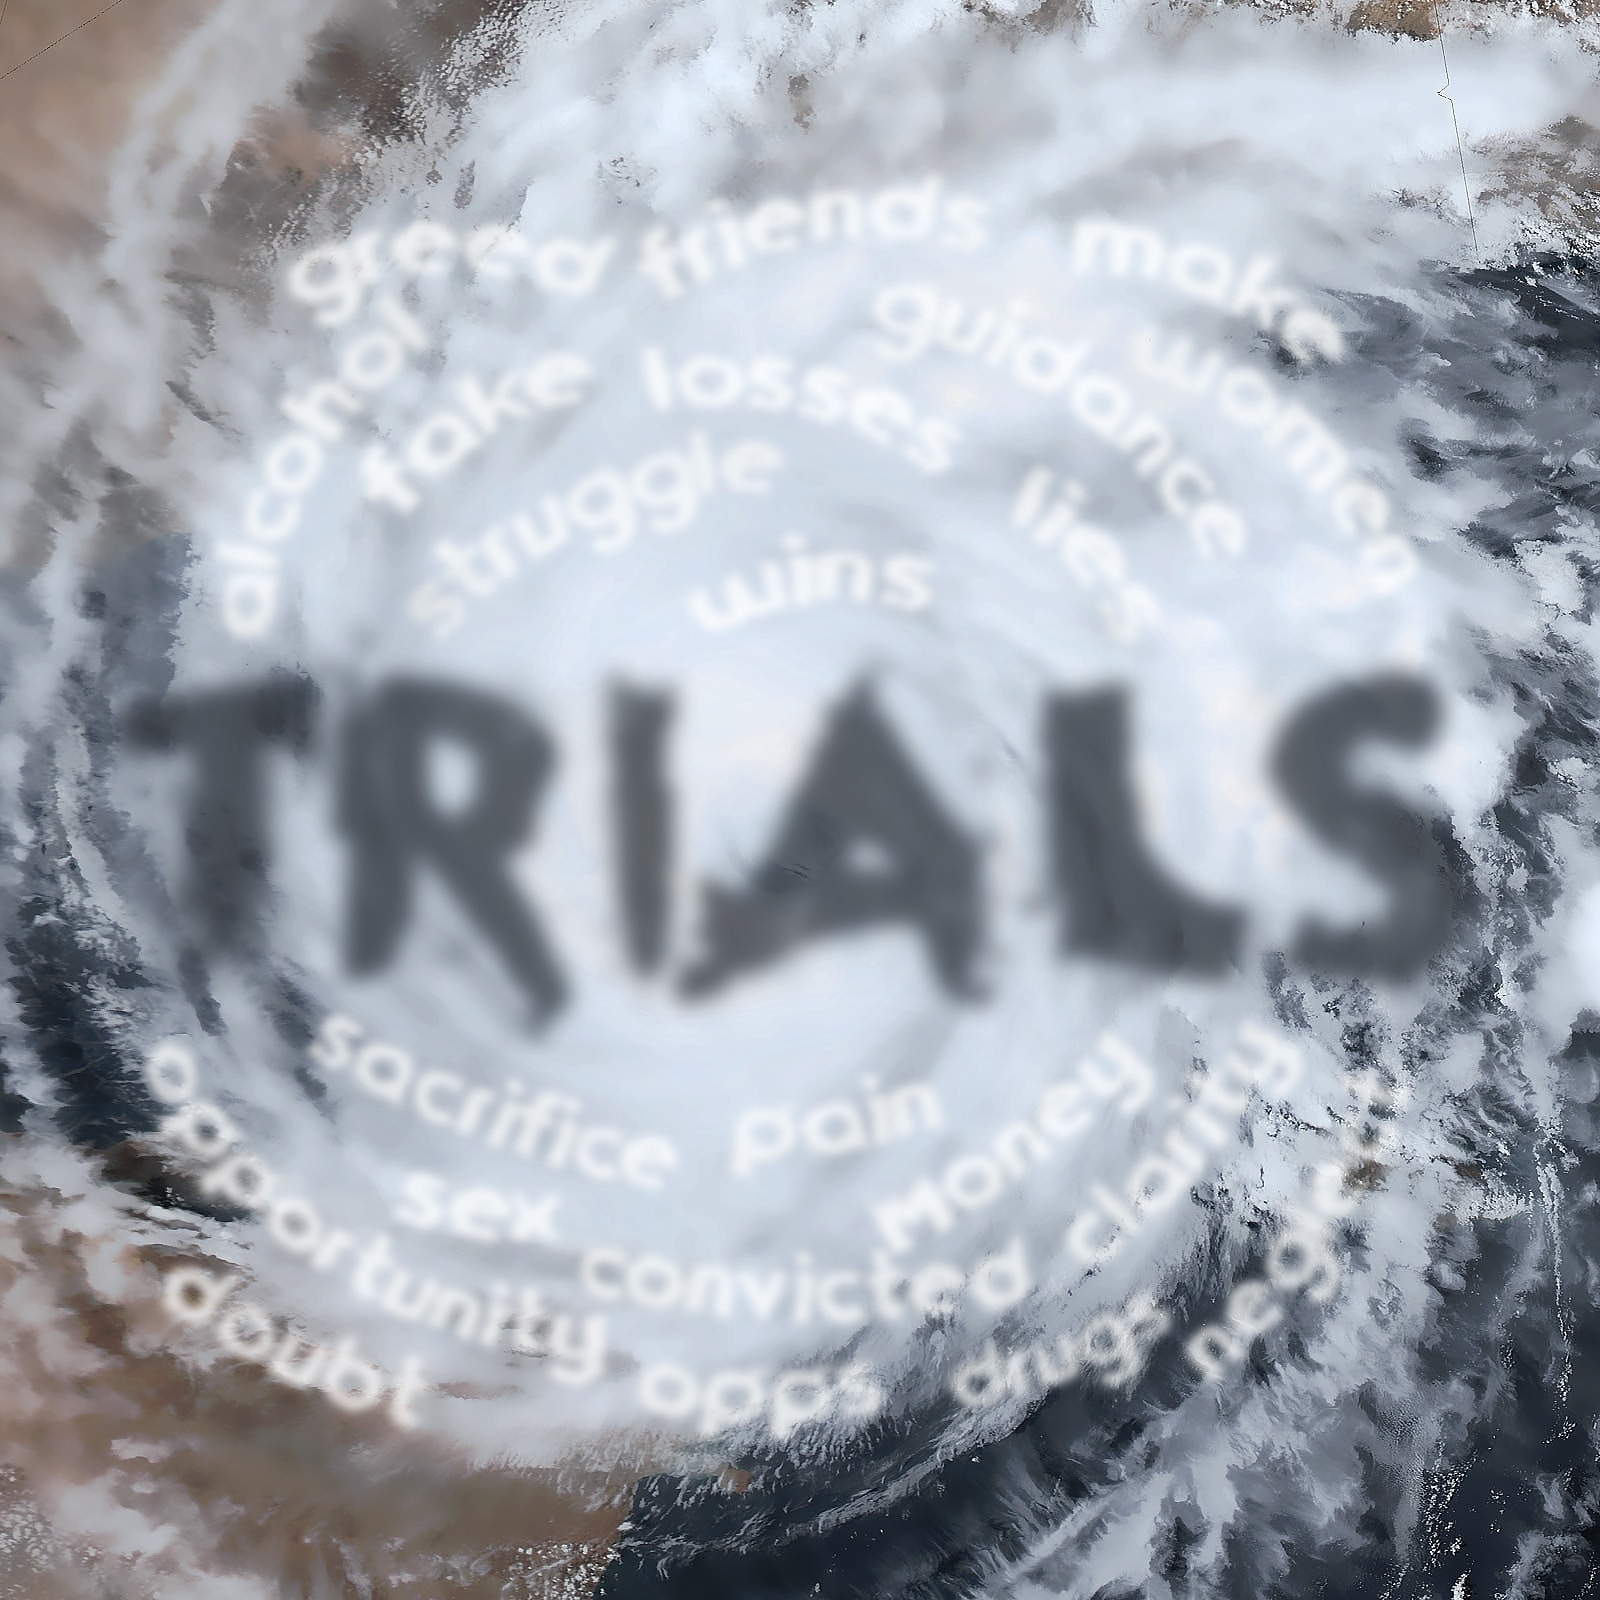 D. Marley Motivates And Inspires In “Trials” (Review & Stream)